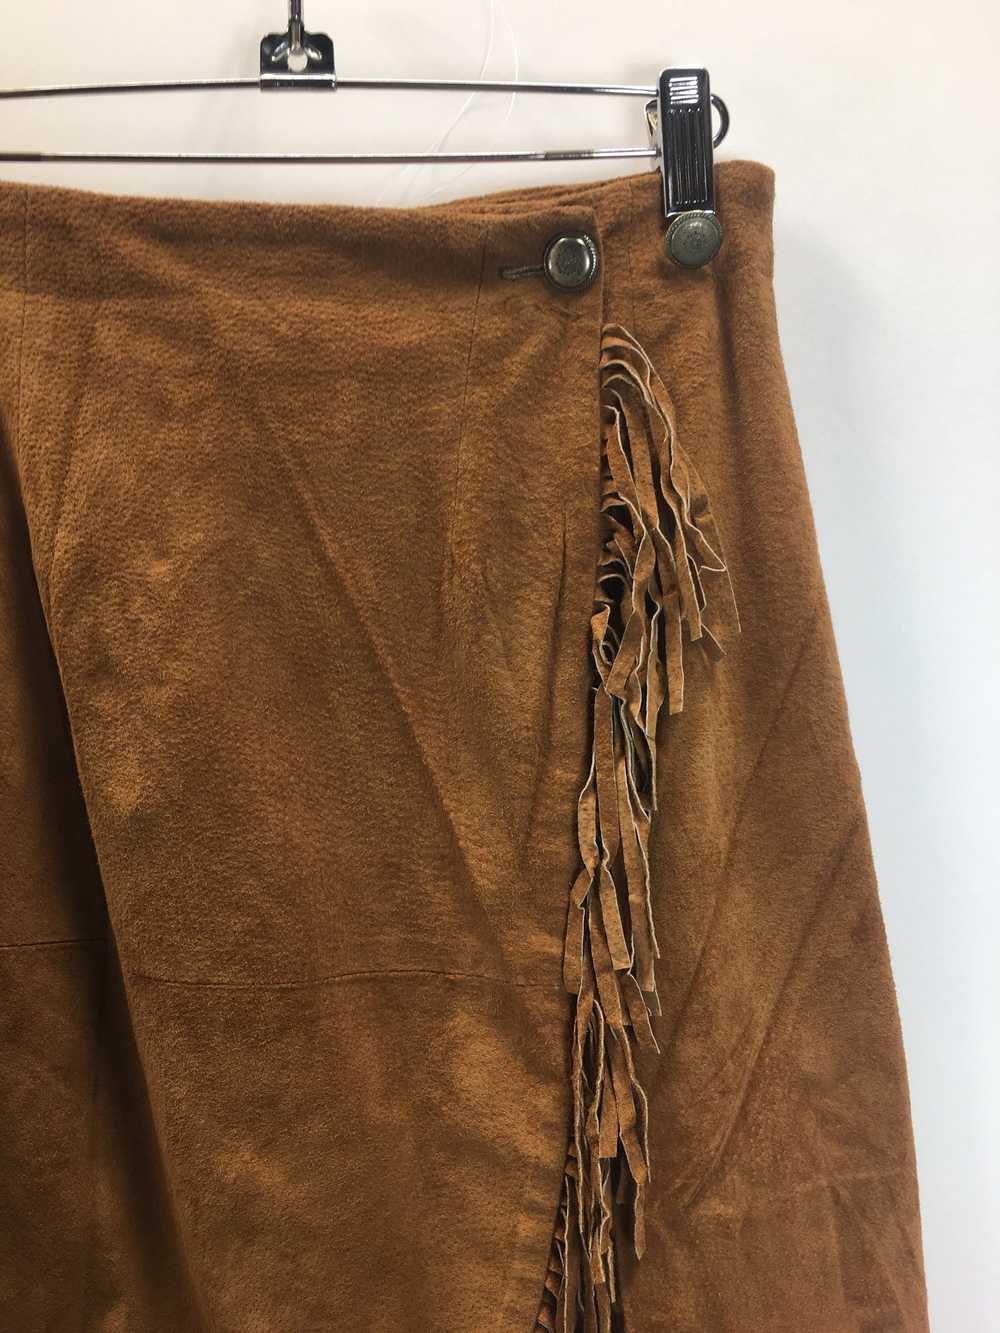 90’s Suede Skirt - image 3